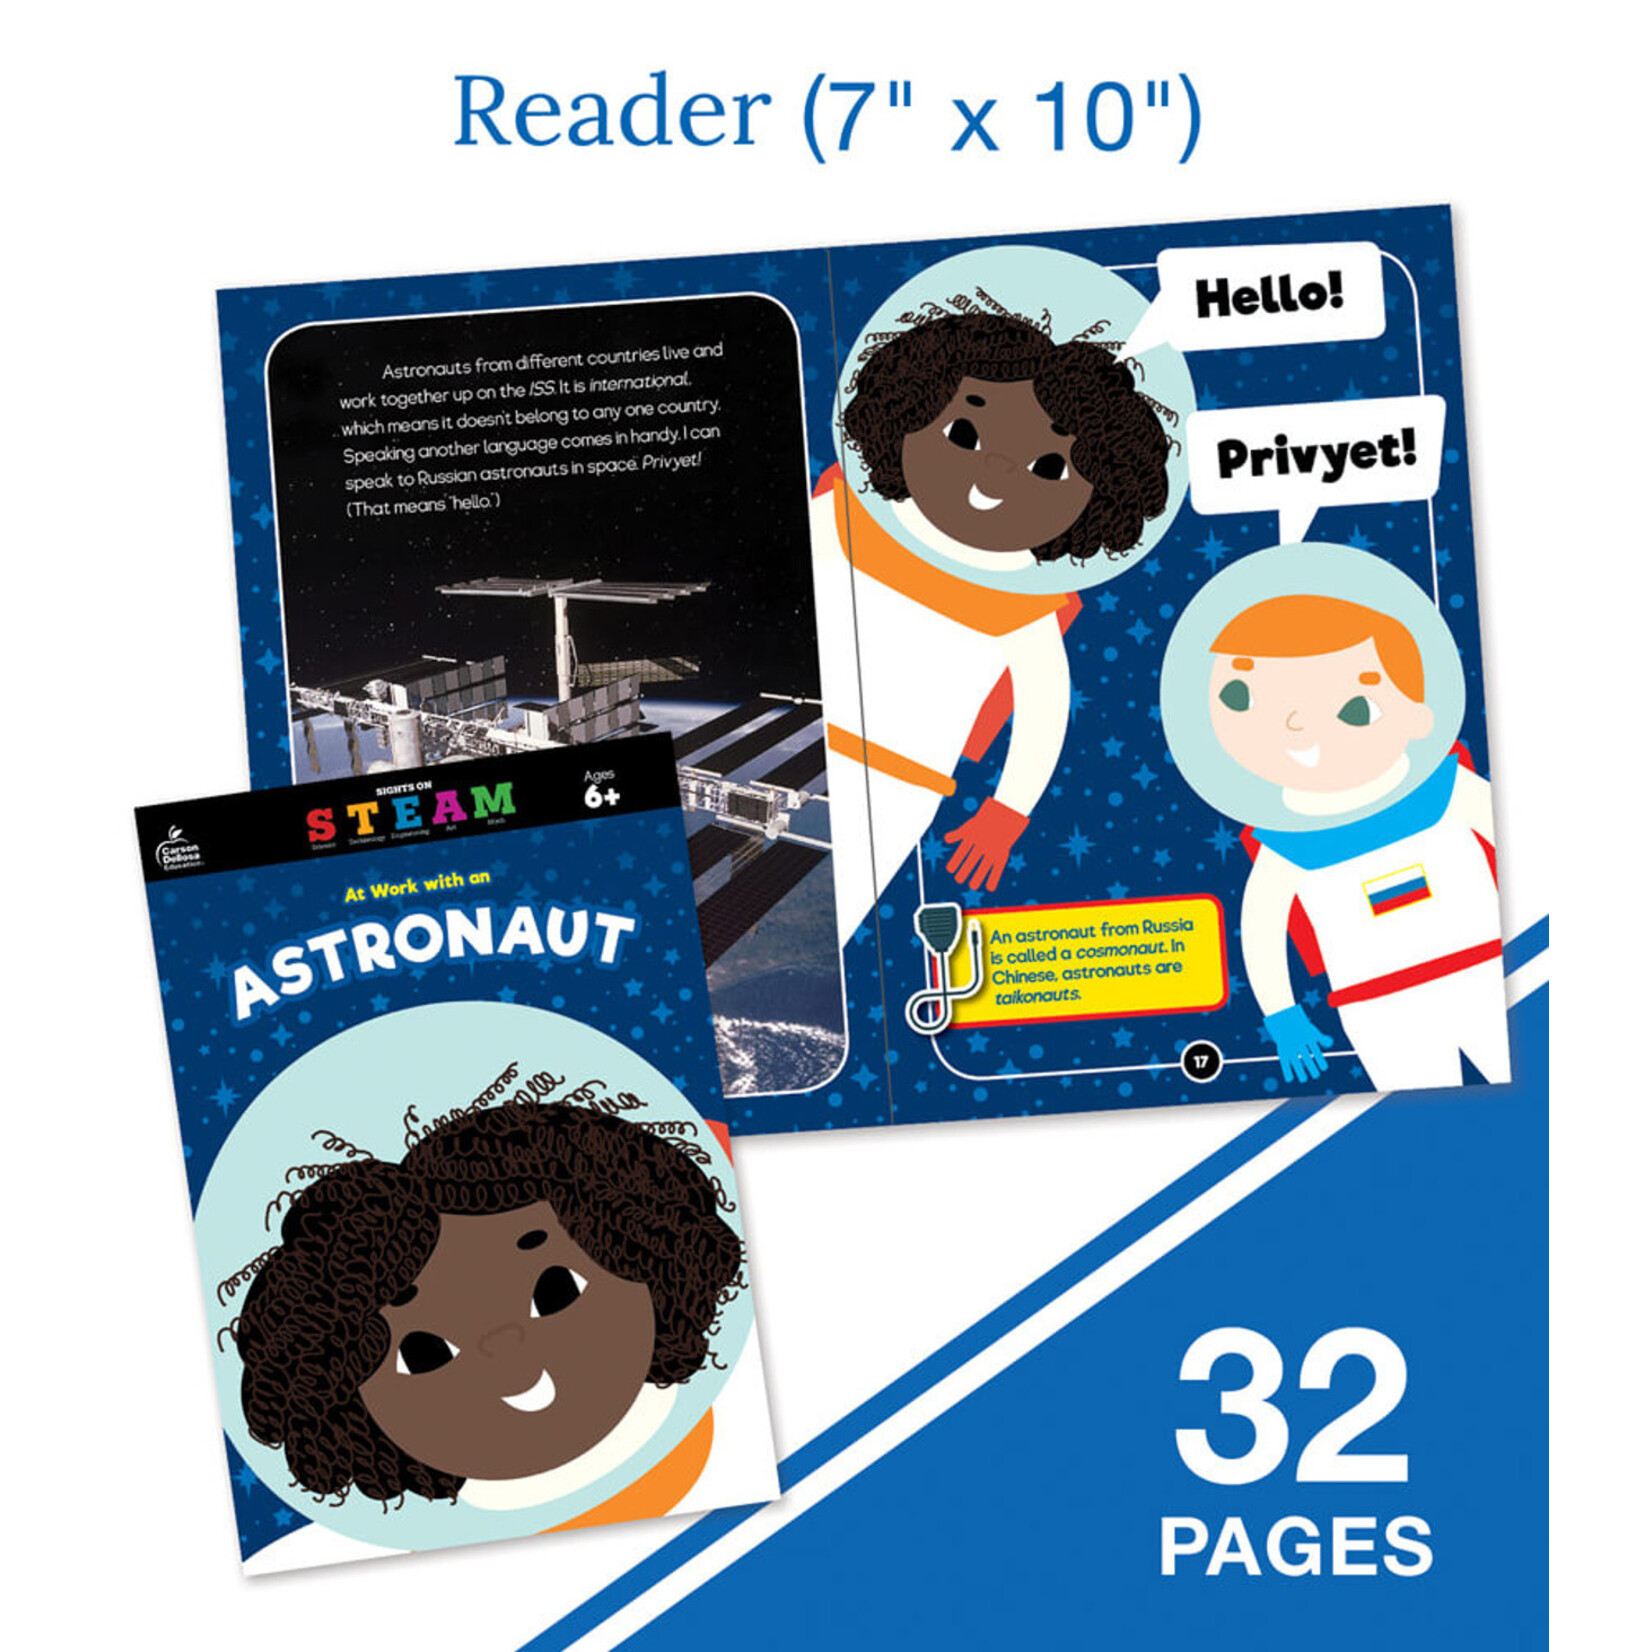 CARSON DELLOSA PUBLISHING CO At Work with an Astronaut Activity Kit Grade 1-3 Paperback